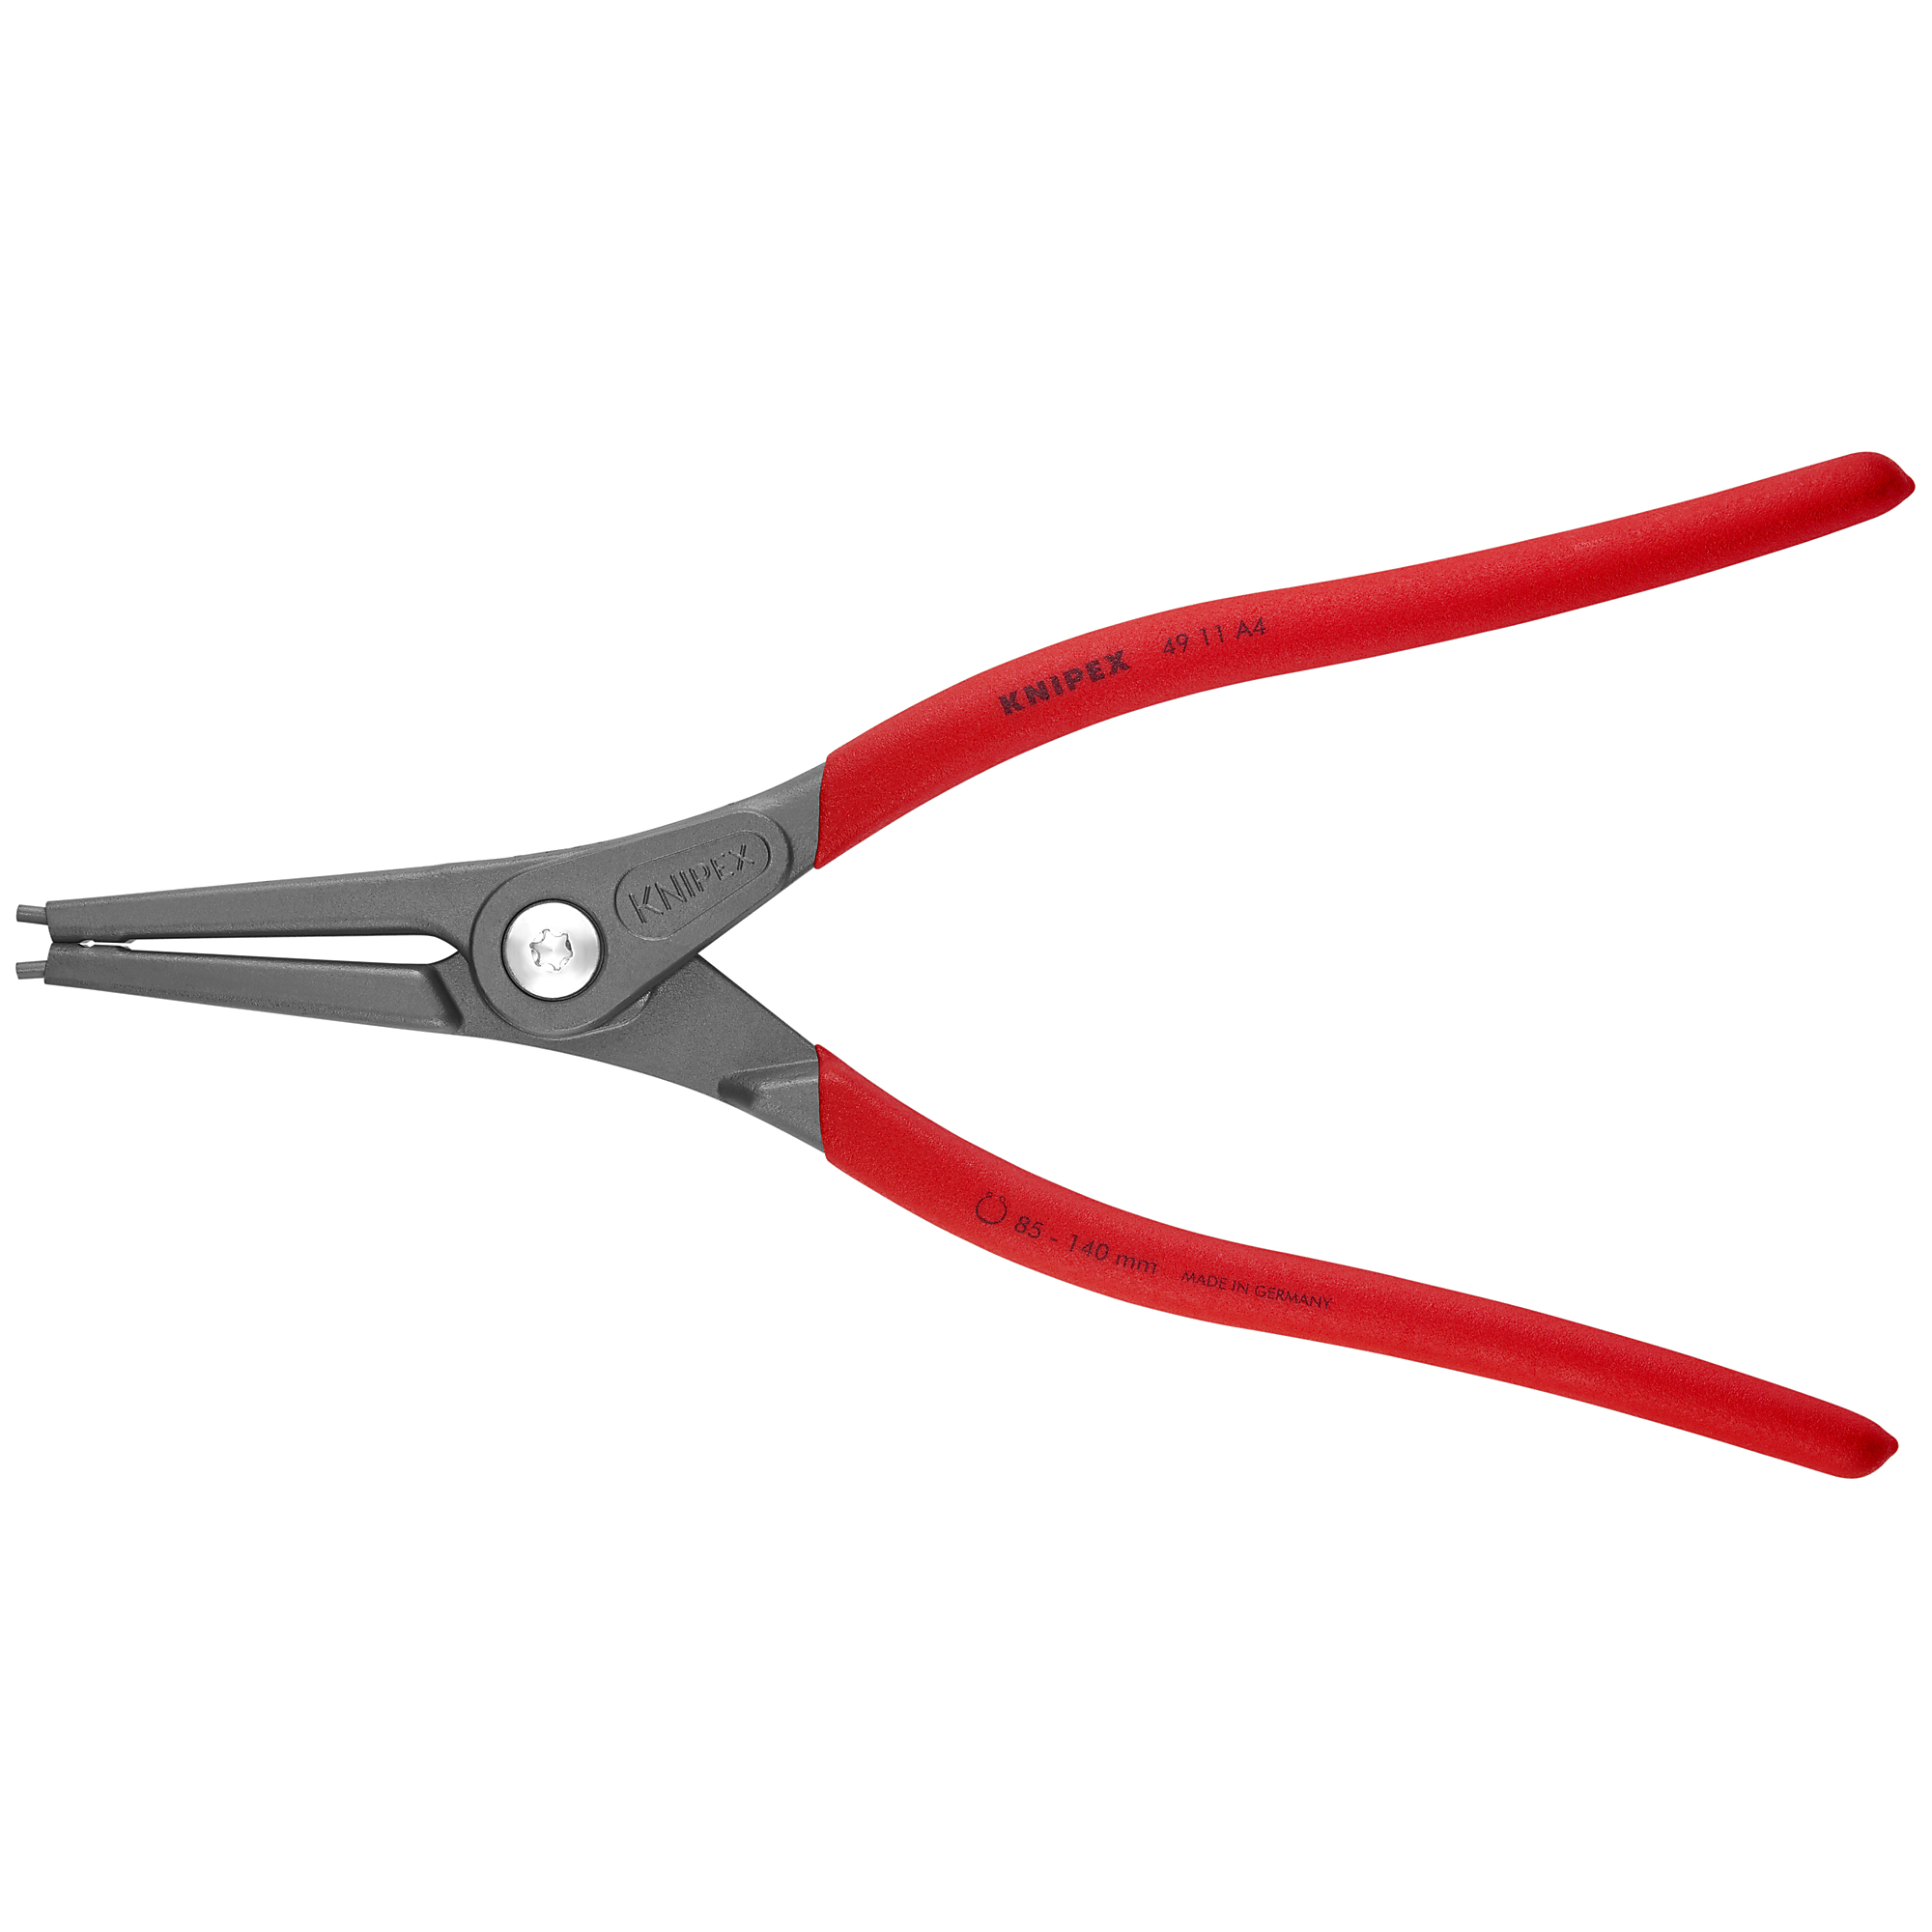 KNIPEX, Ext Precision Snap Ring Pliers, 1/8 tip, 13Inch, Pieces (qty.) 1 Material Steel, Model 49 11 A4